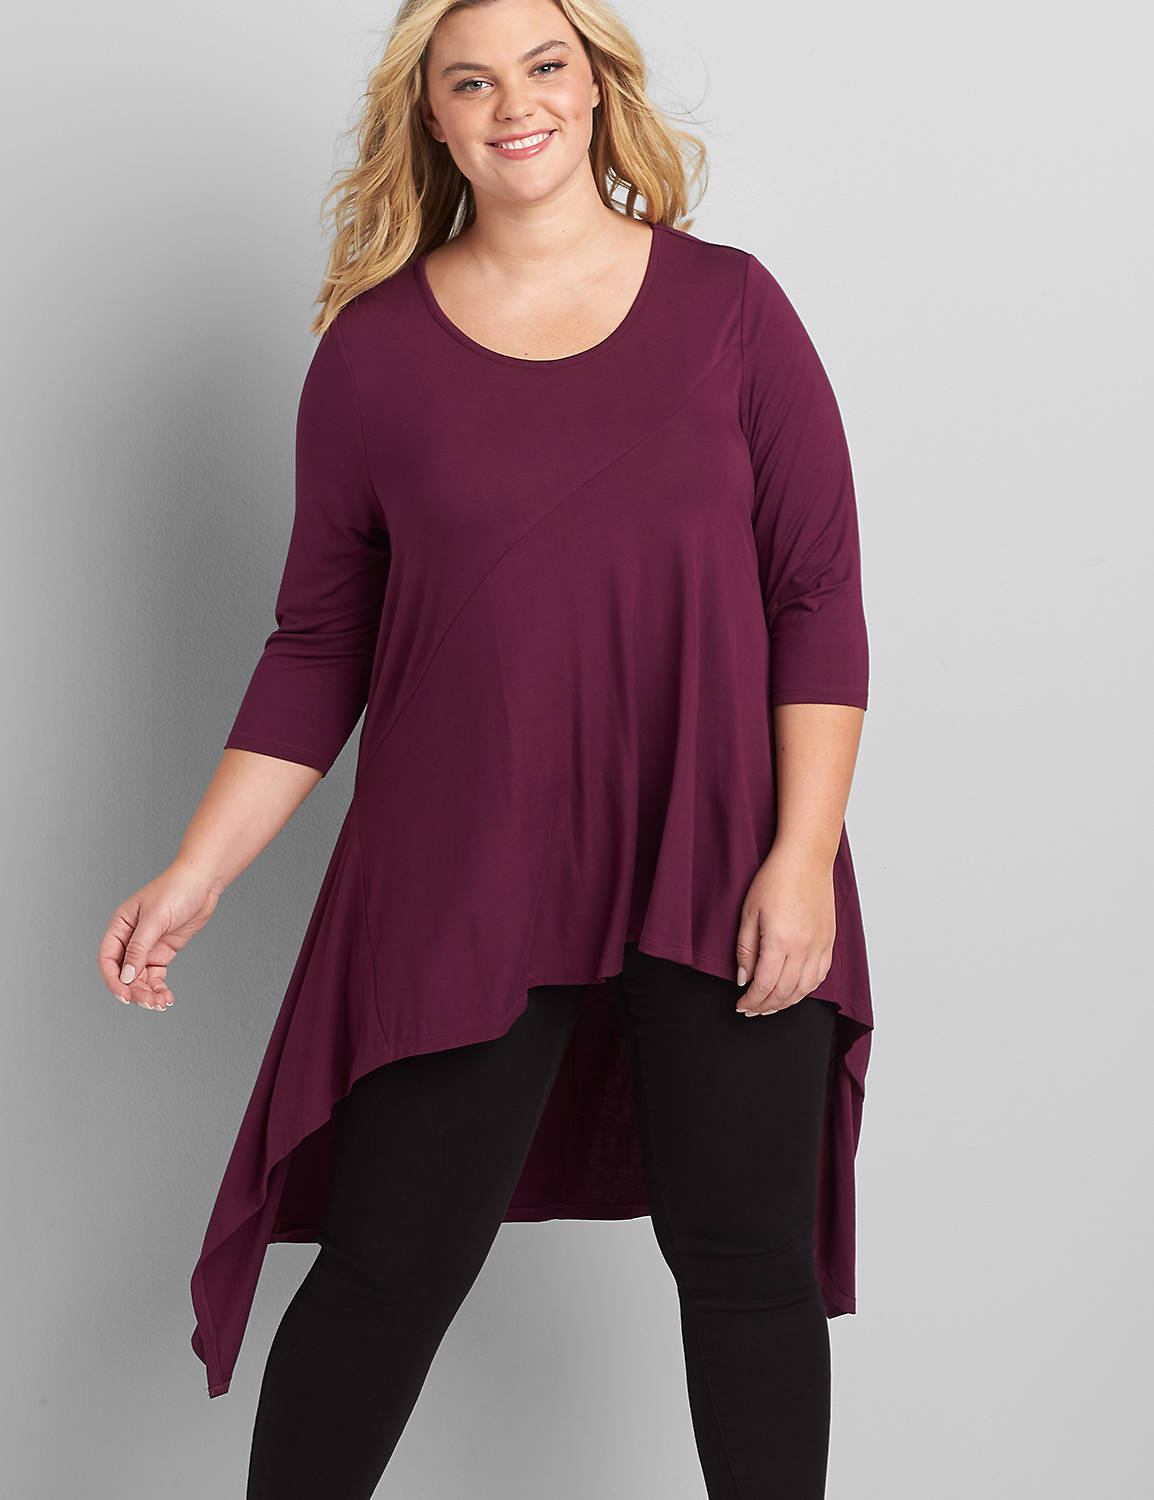 3/4 Sleeve Scoop Neck Extreme Asym Tunic 1115018:PANTONE Pickled Beet:18/20 Product Image 1